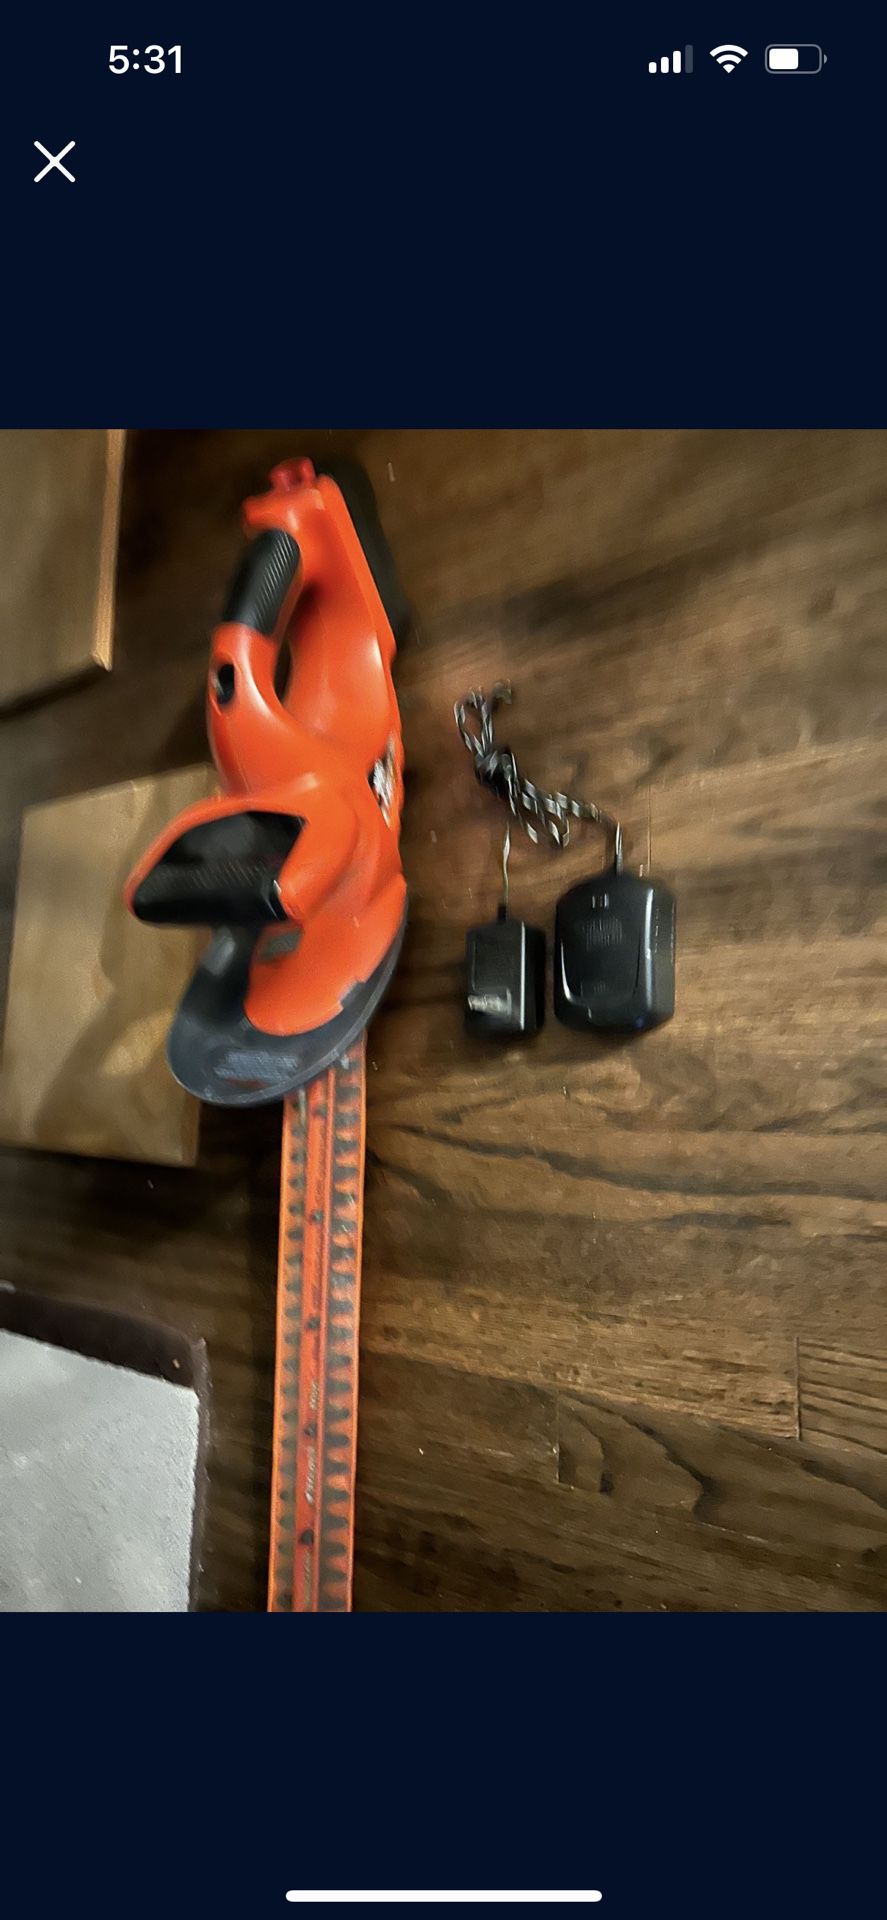 Cordless Black and Decker Hedge Trimmer 22 Inch 18 Volt 1 Battery And Charger Asking Works Great Still Like New Need Gone Today  Asking 60 